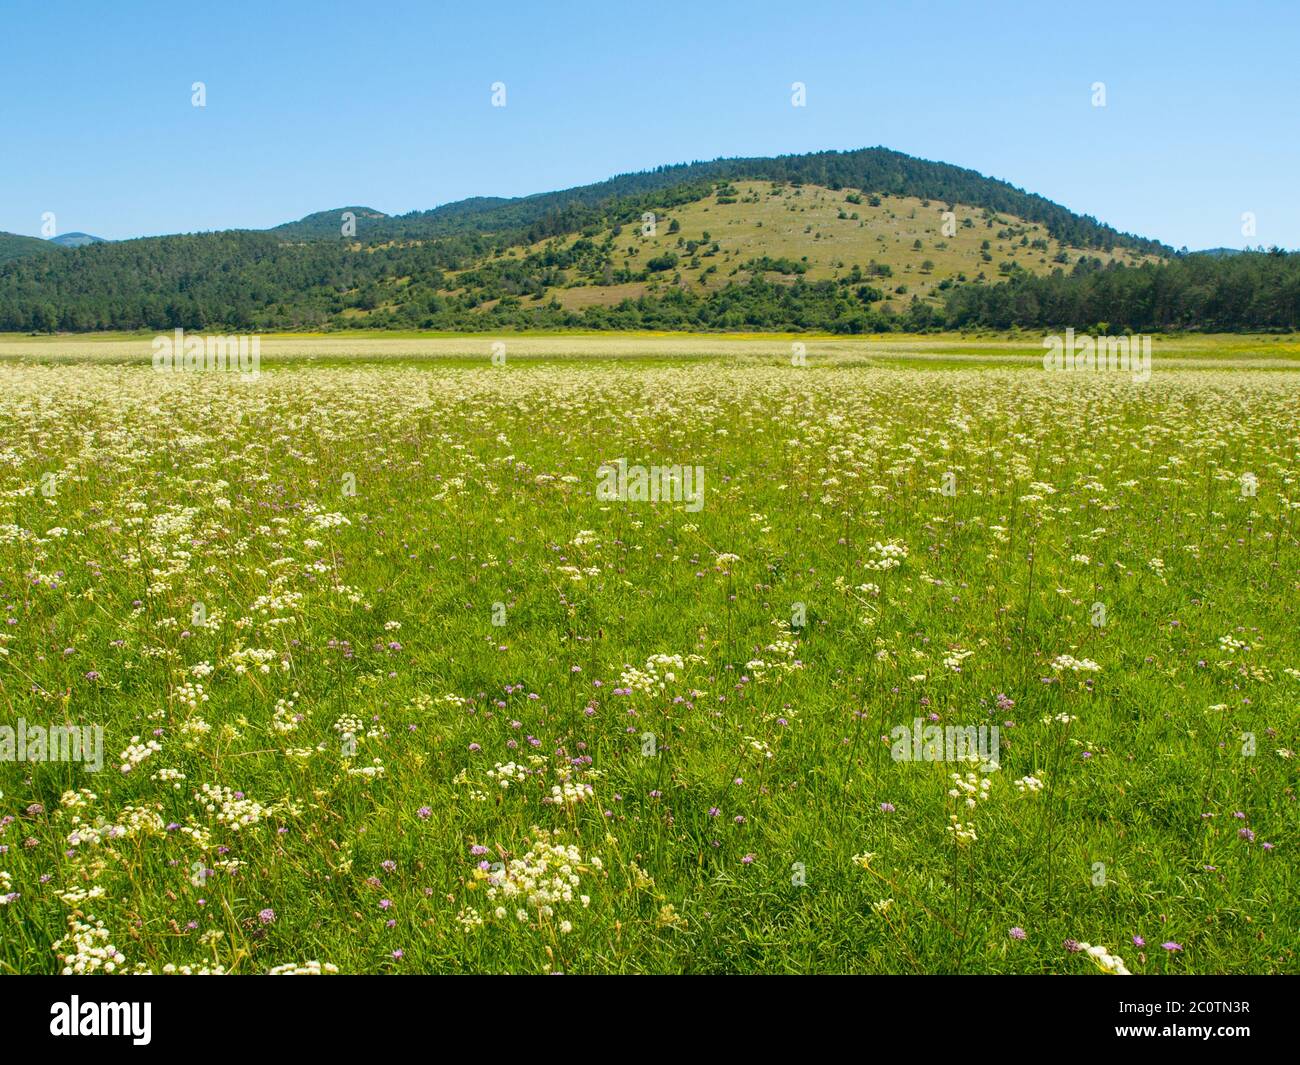 Intermittent lake is typical in slovenian Green Karst. In dry summer season looks like meadow. Stock Photo